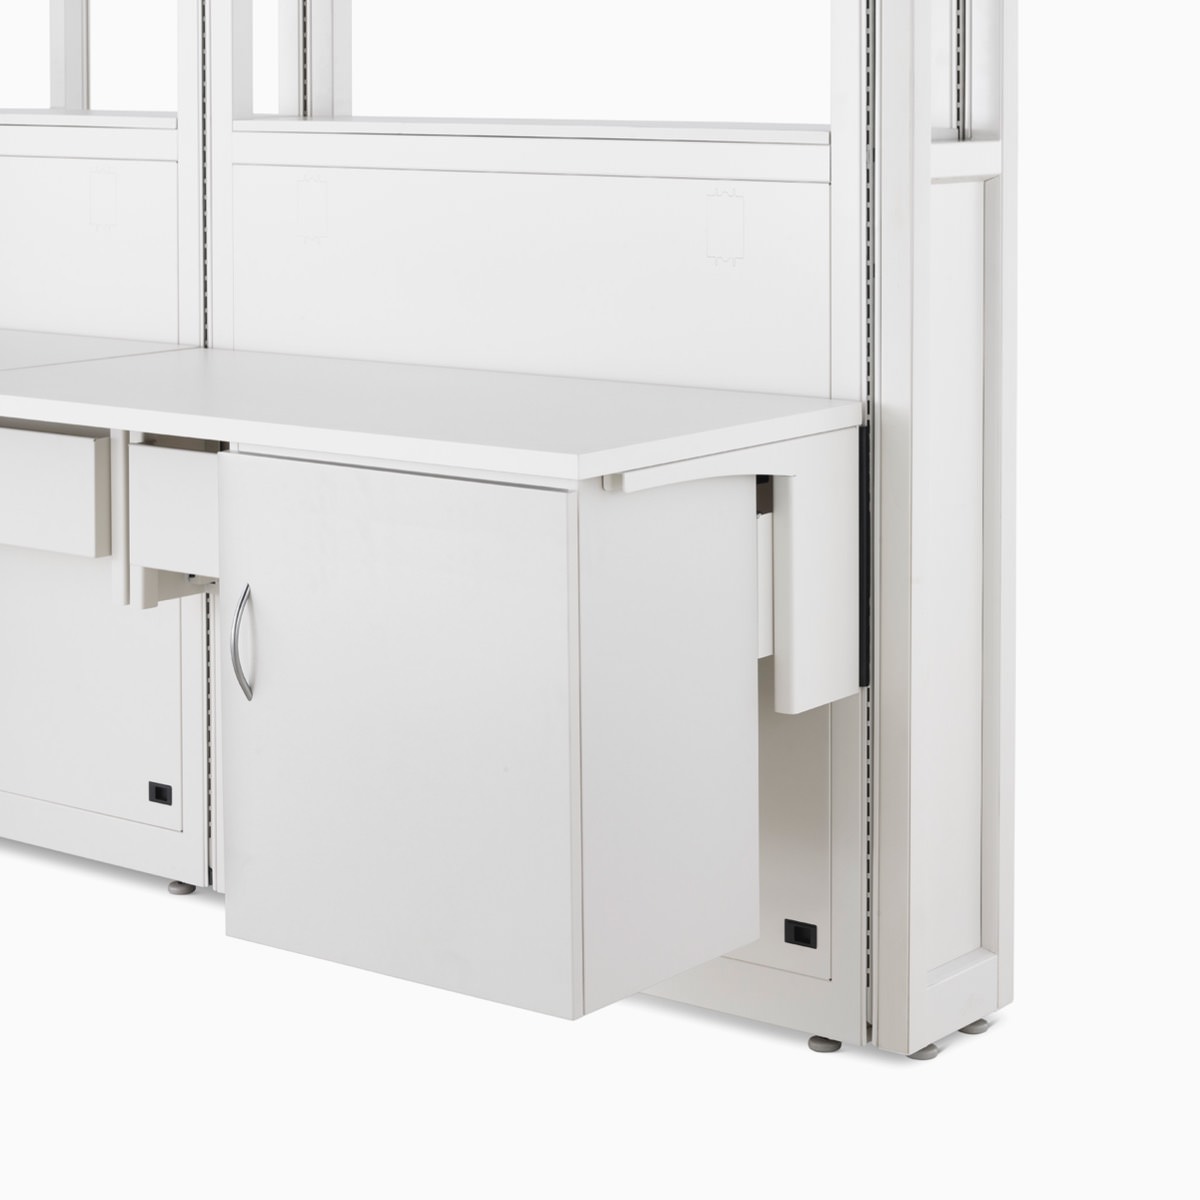 Detail of soft white Co/Struc System frame module, work surface, and storage unit hanging on an adapter rail under the surface.